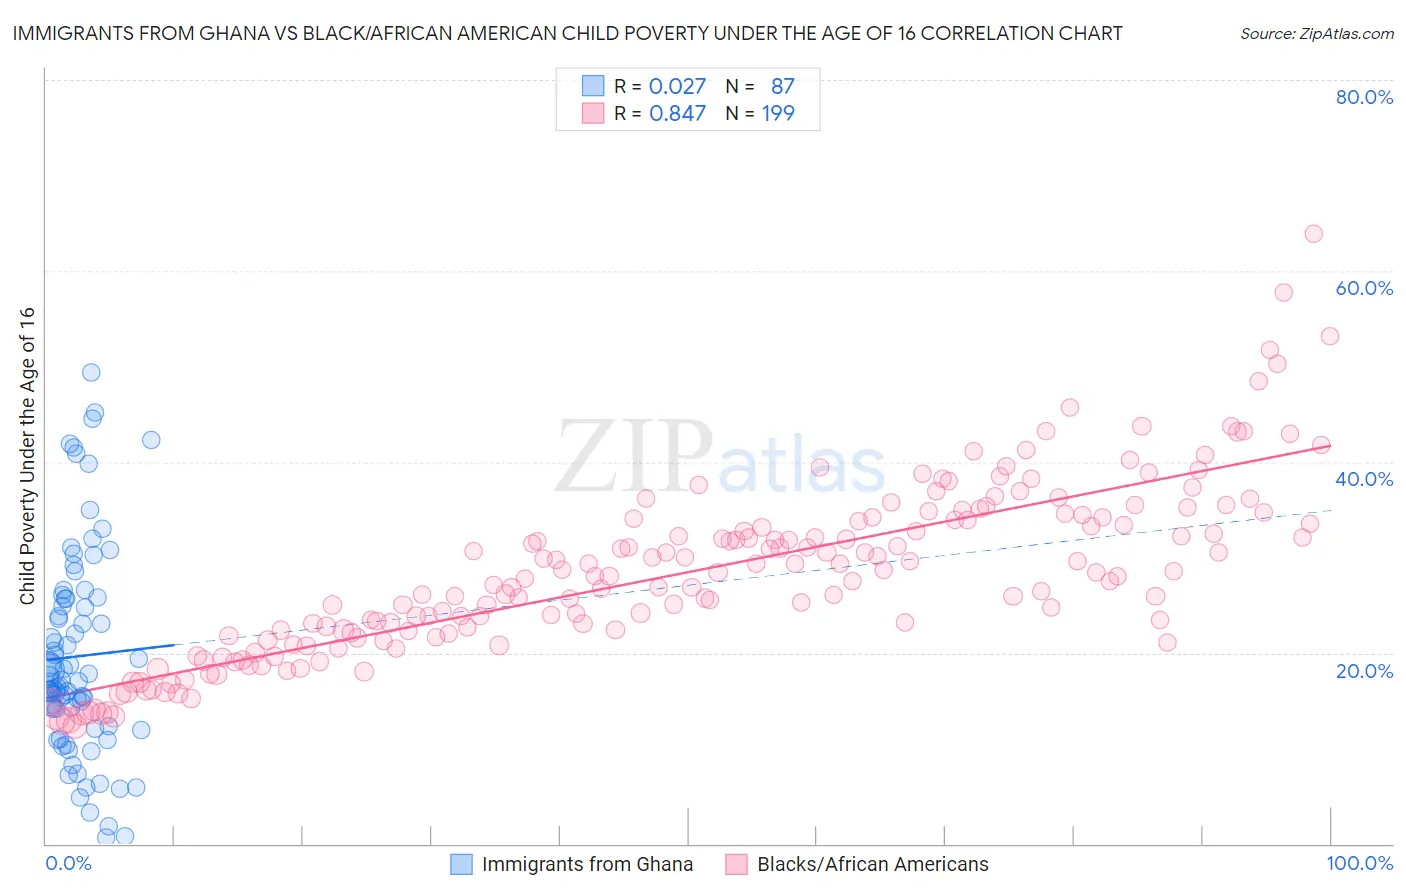 Immigrants from Ghana vs Black/African American Child Poverty Under the Age of 16